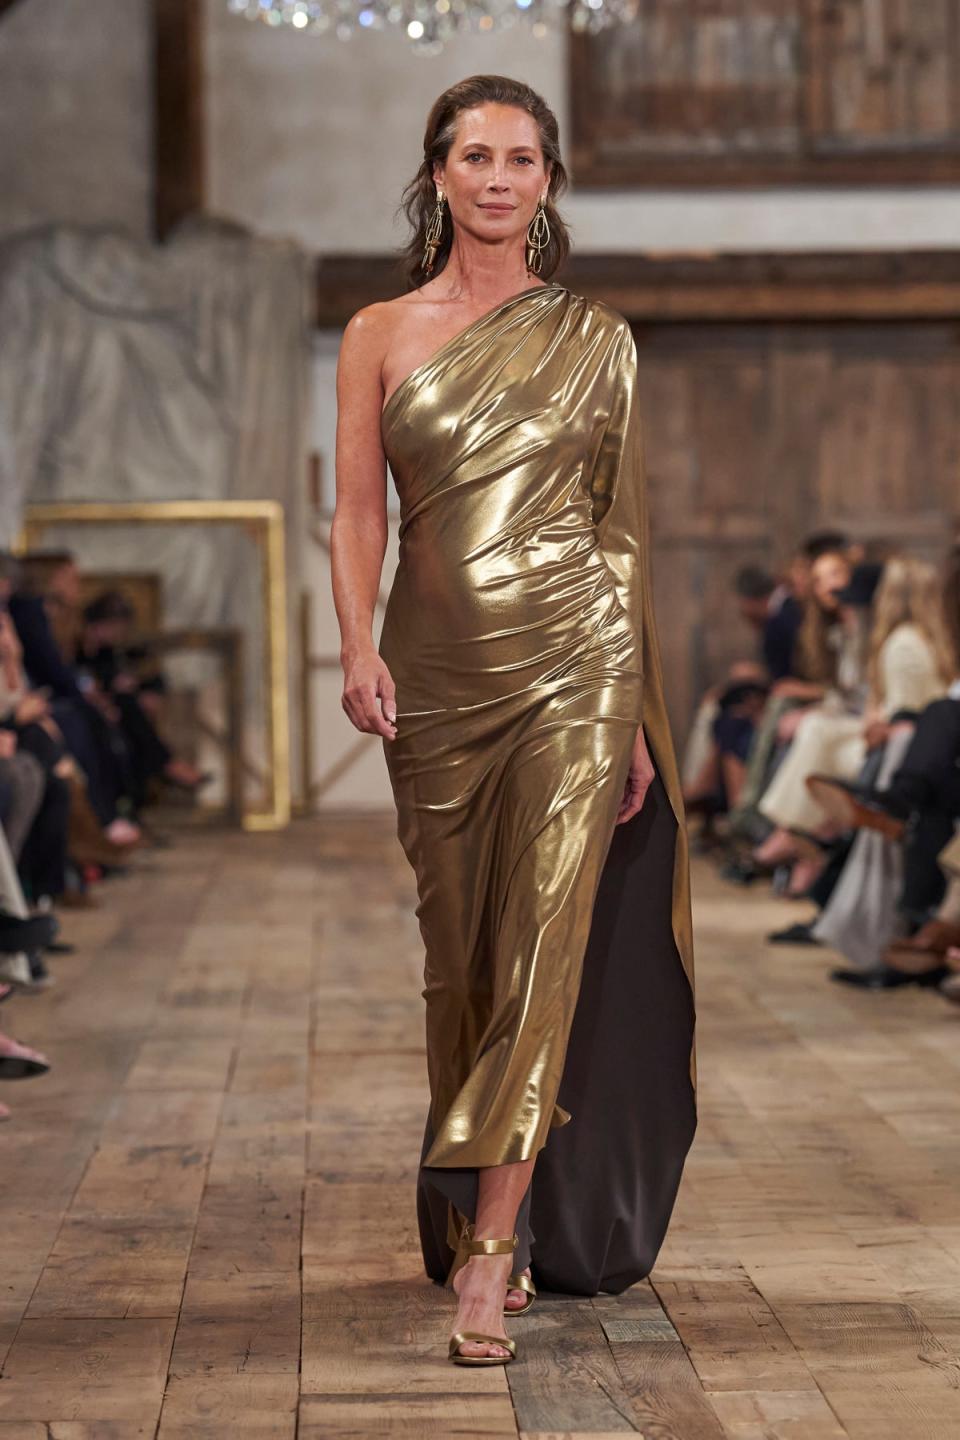 Christy Turlington closed the Ralph Lauren show in a gold gown. (IMAXTREE)